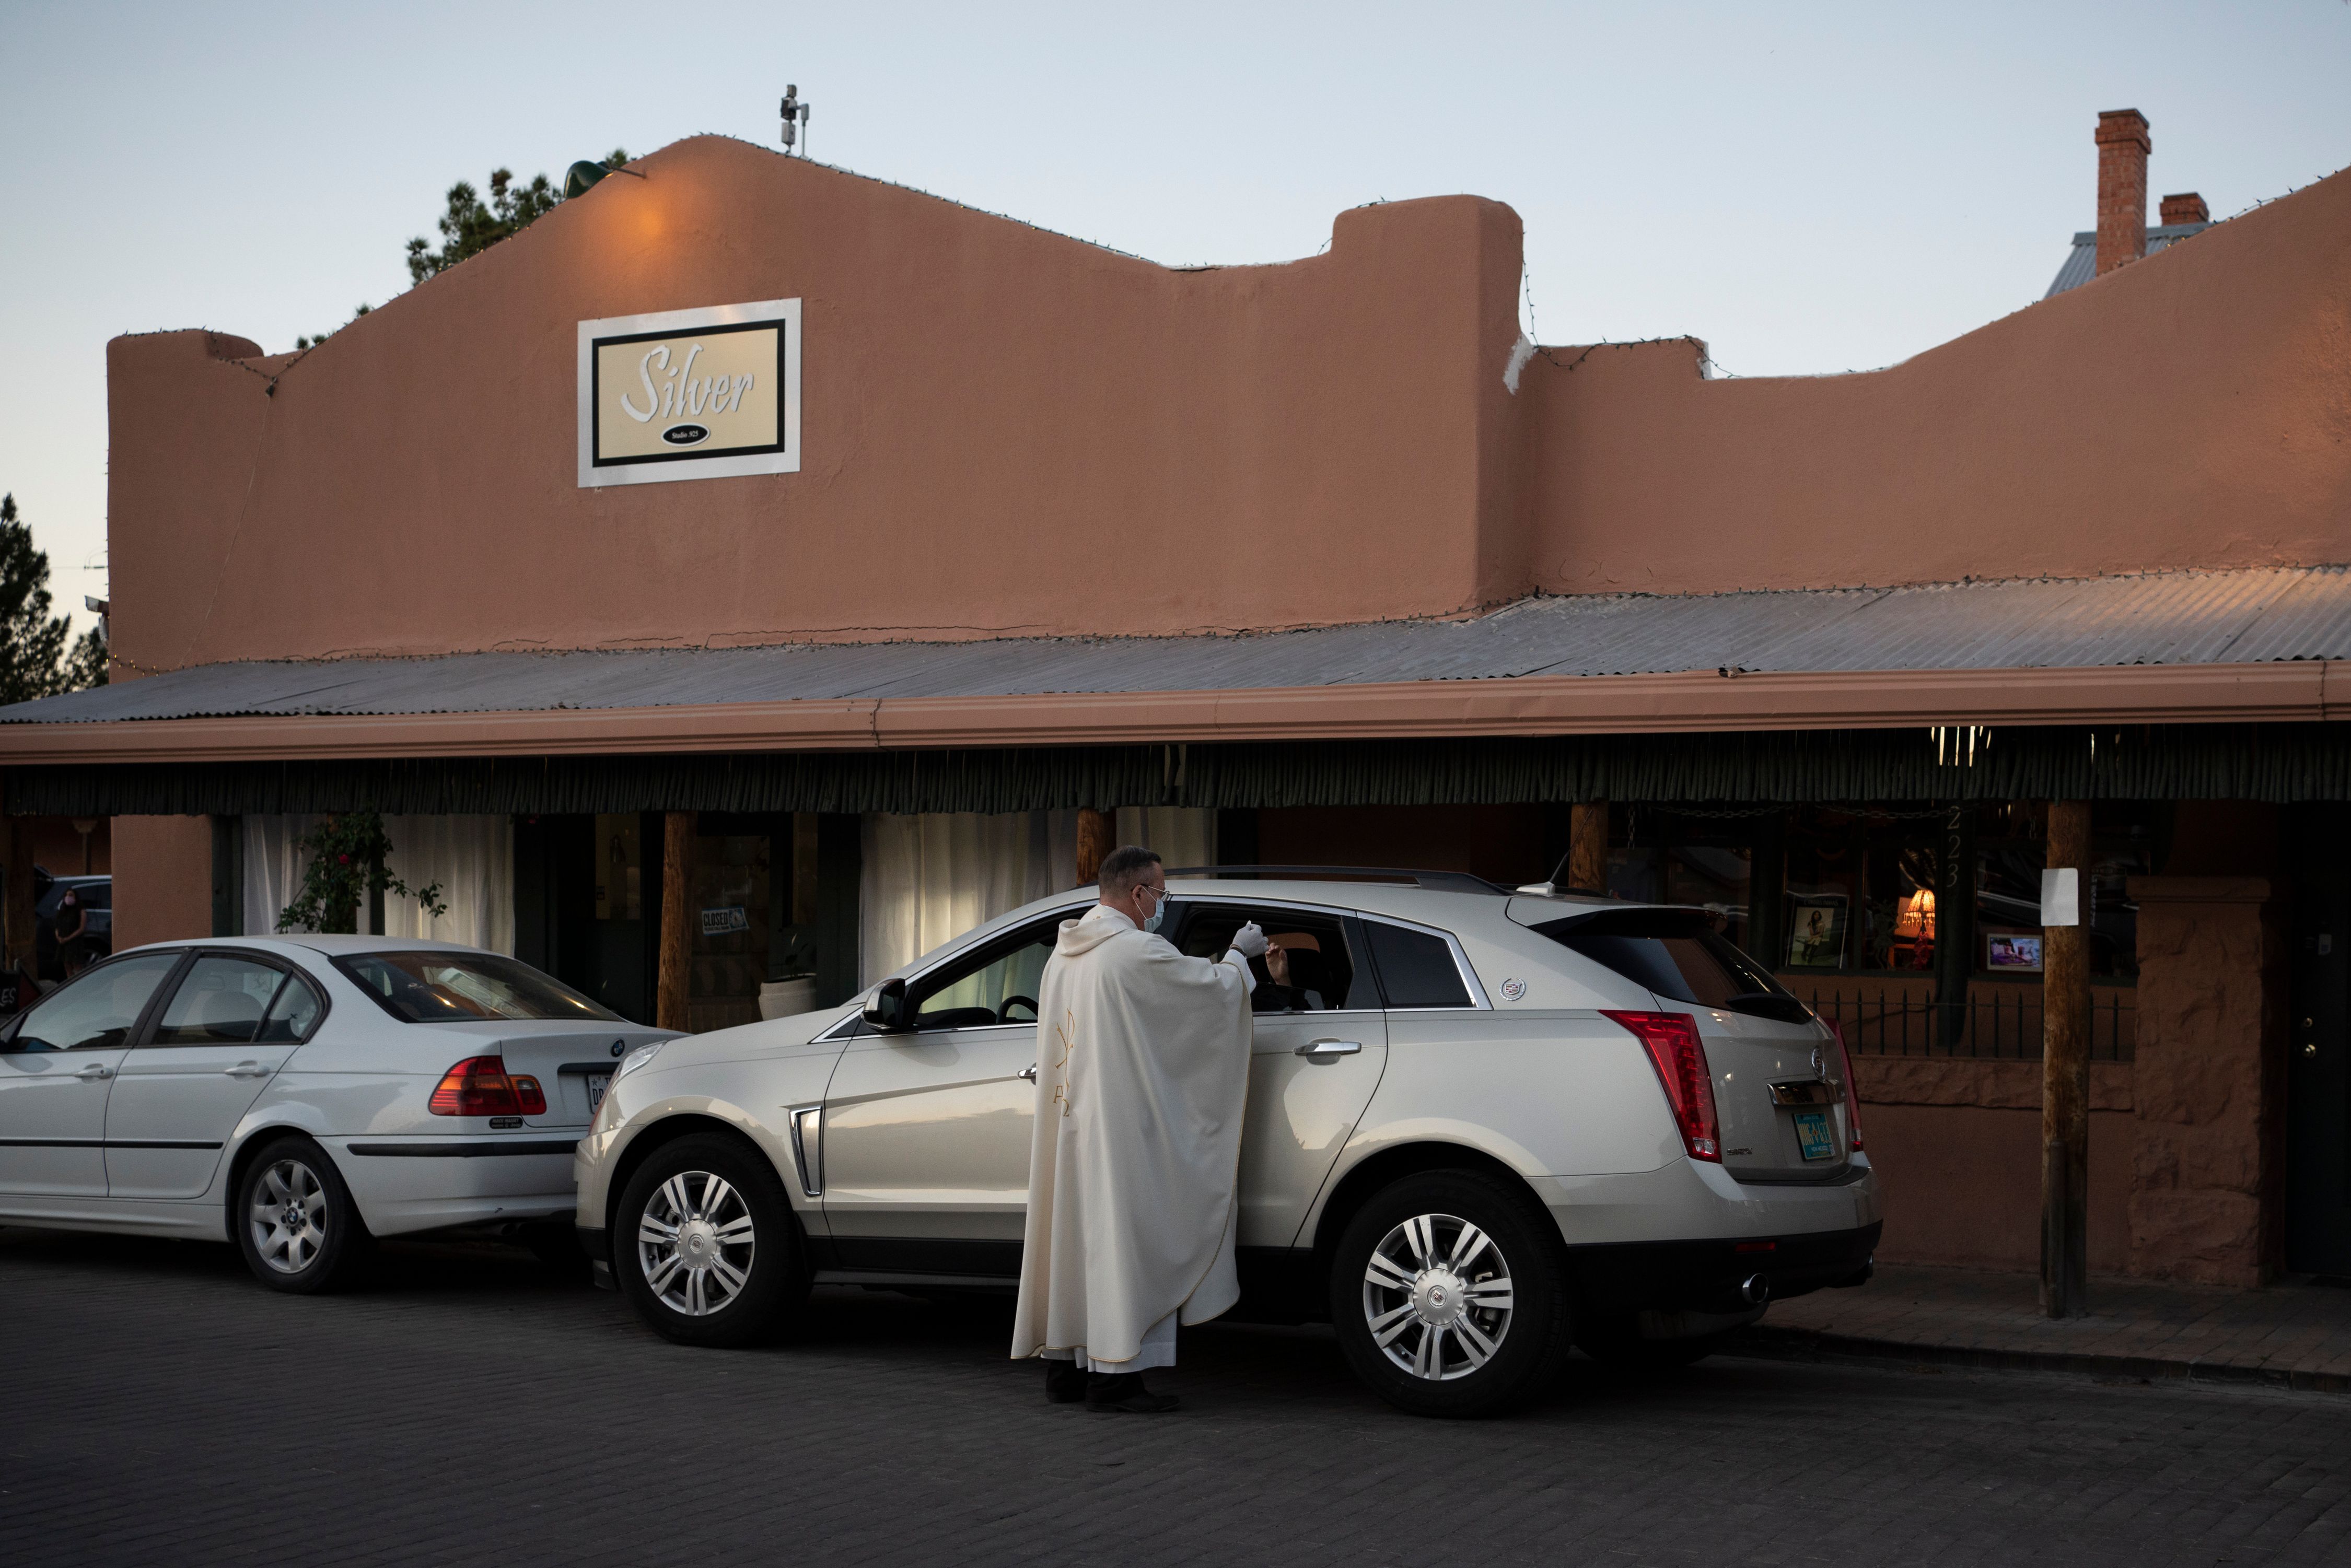 Father Christoper Williams gives communion to parishioners in their cars outside of the Basilica of San Albino on May 2, 2020. (Photo by PAUL RATJE/AFP via Getty Images)